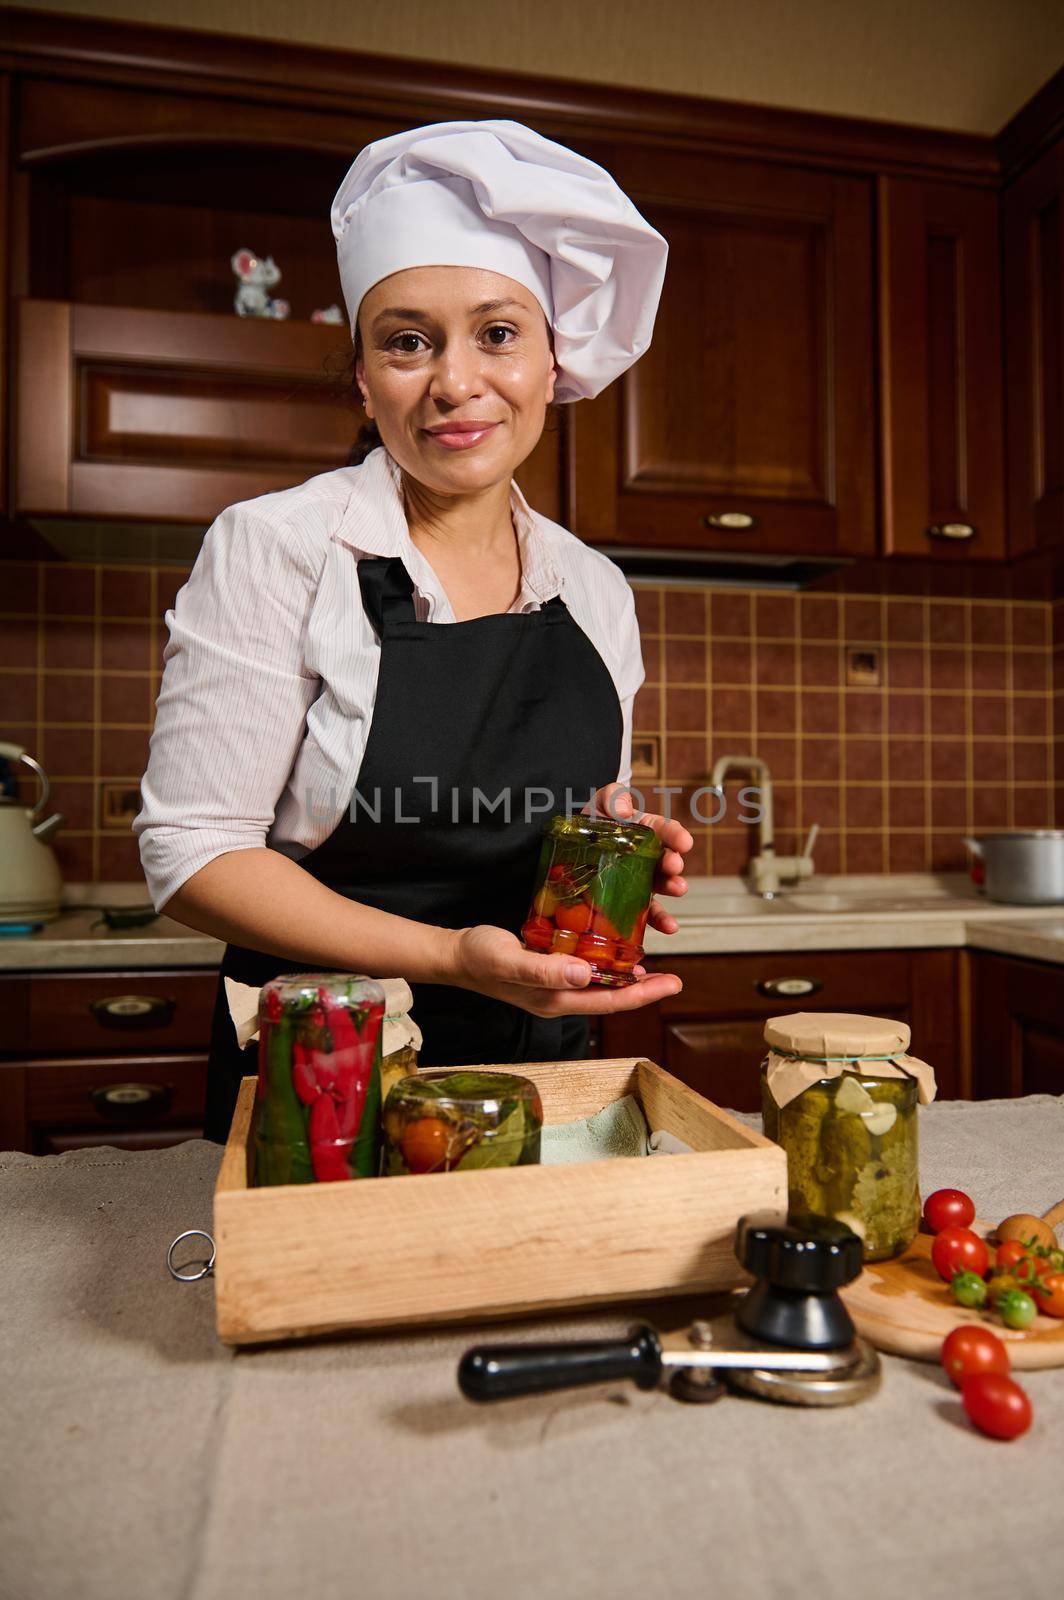 Pretty housewife holds a jar of fermented cherry tomatoes upside down, smiling at camera while standing at kitchen table by artgf